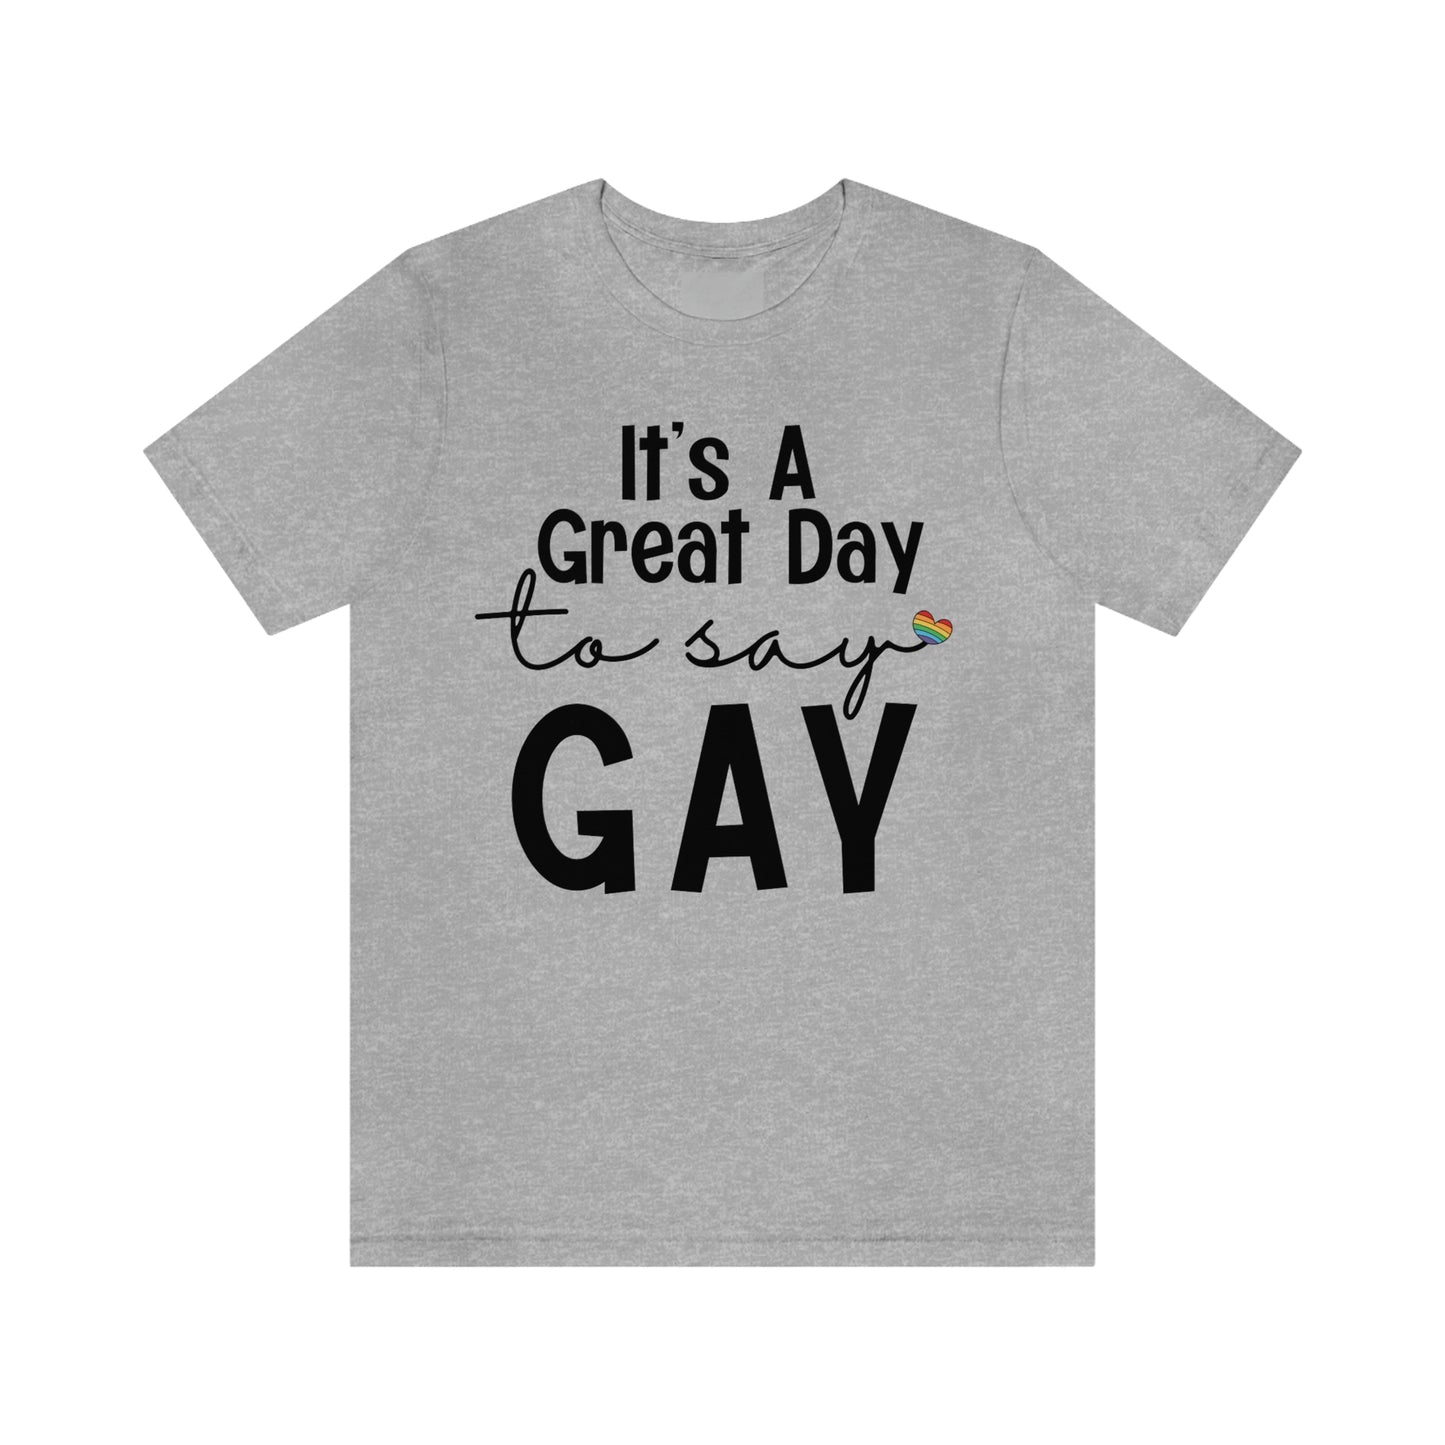 Pride: It's a Great Day to Say Gay - Jersey Short Sleeve Unisex Tee